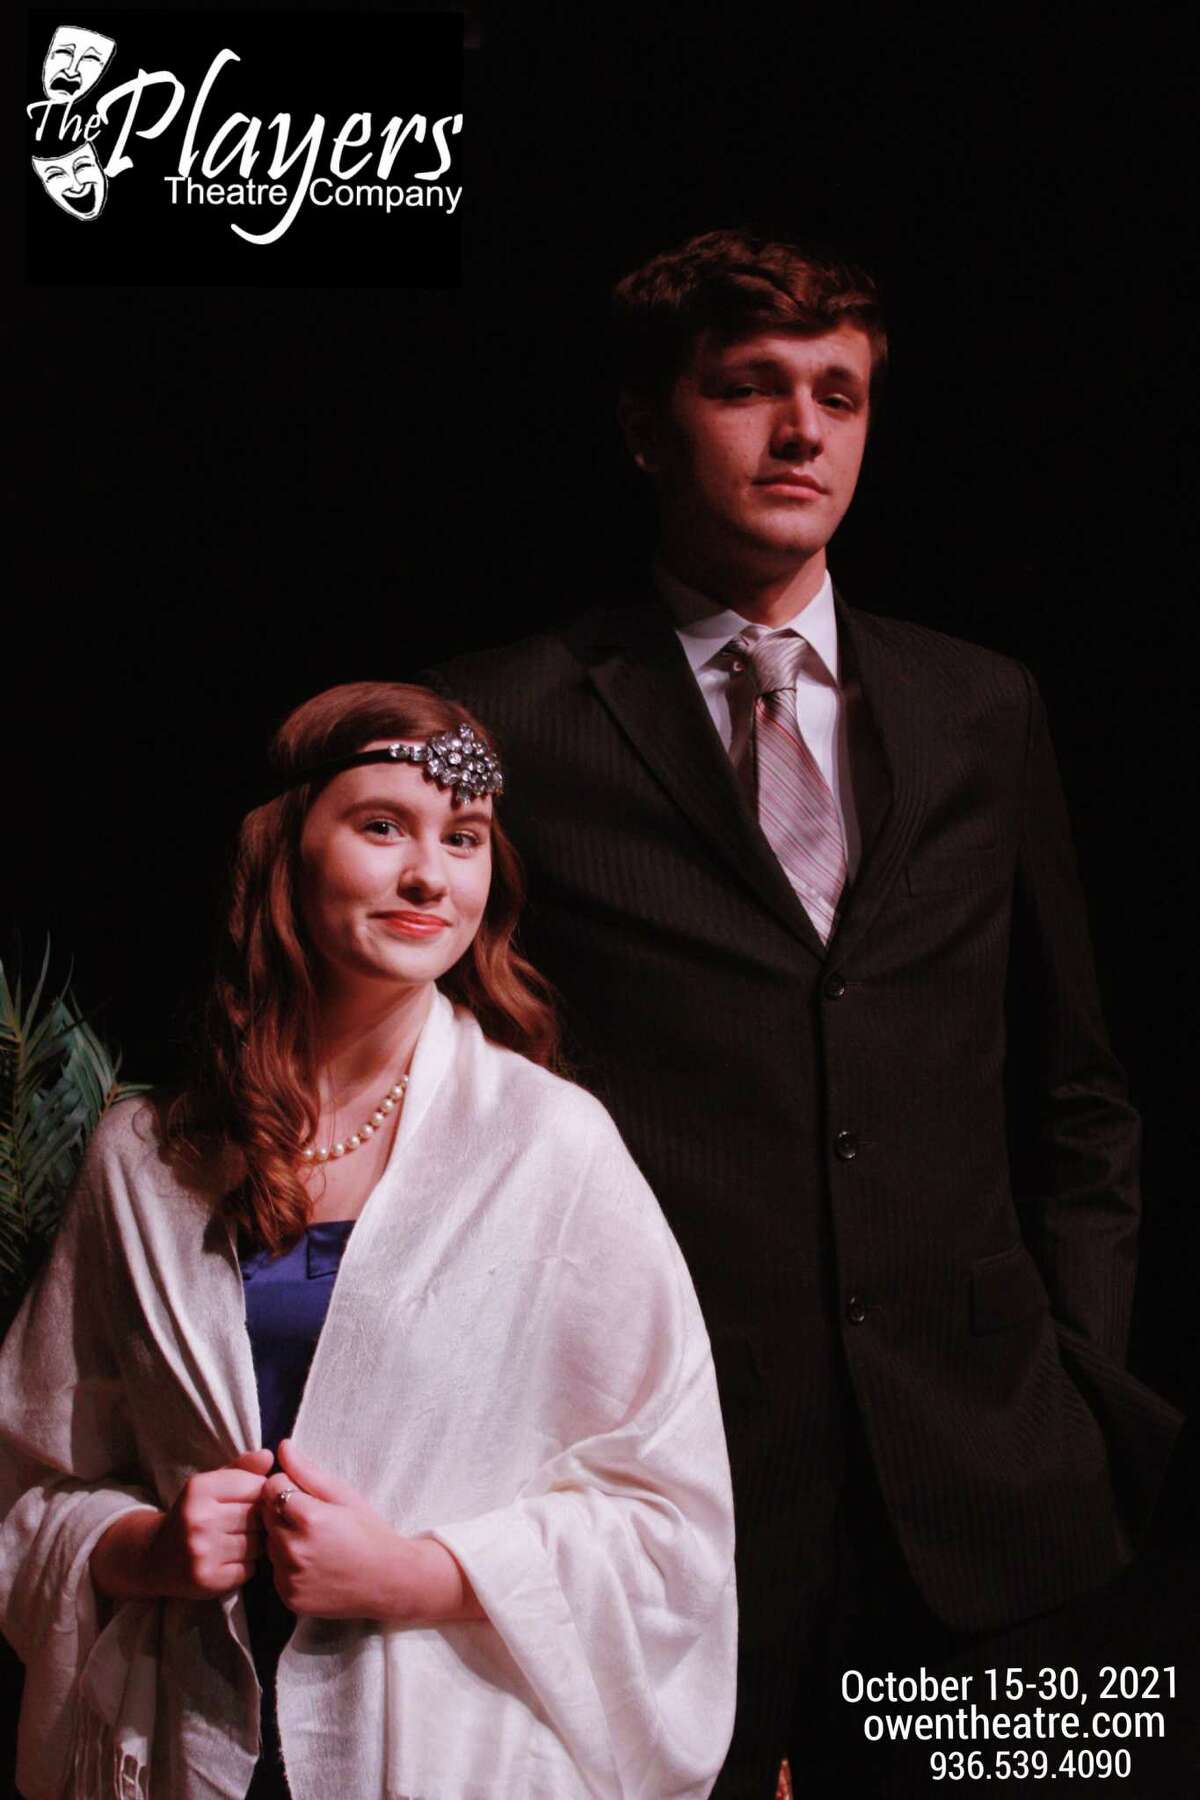 Hannah Cook as Leila and Bryan Allred as Raglan in The Players' "Rope" opening Oct. 15 at the Owen Theatre.